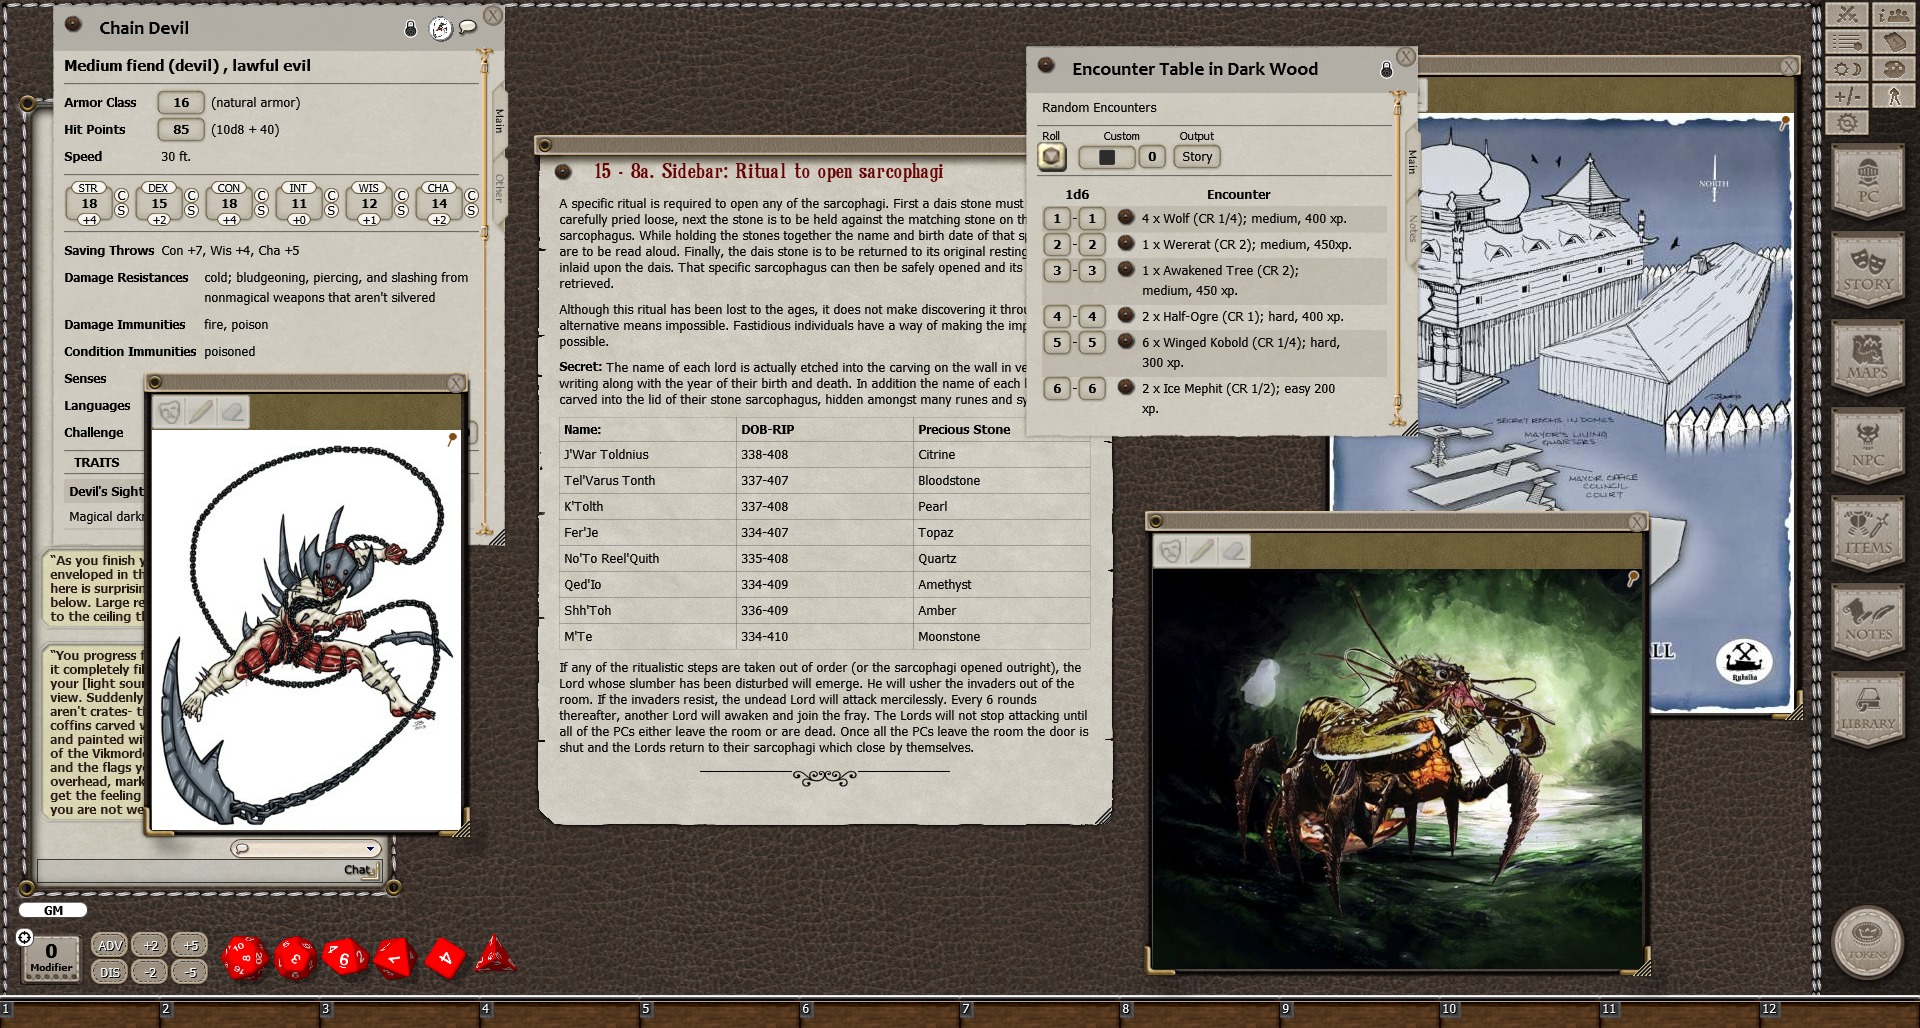 Fantasy Grounds - 5E: Champion's Rest Featured Screenshot #1